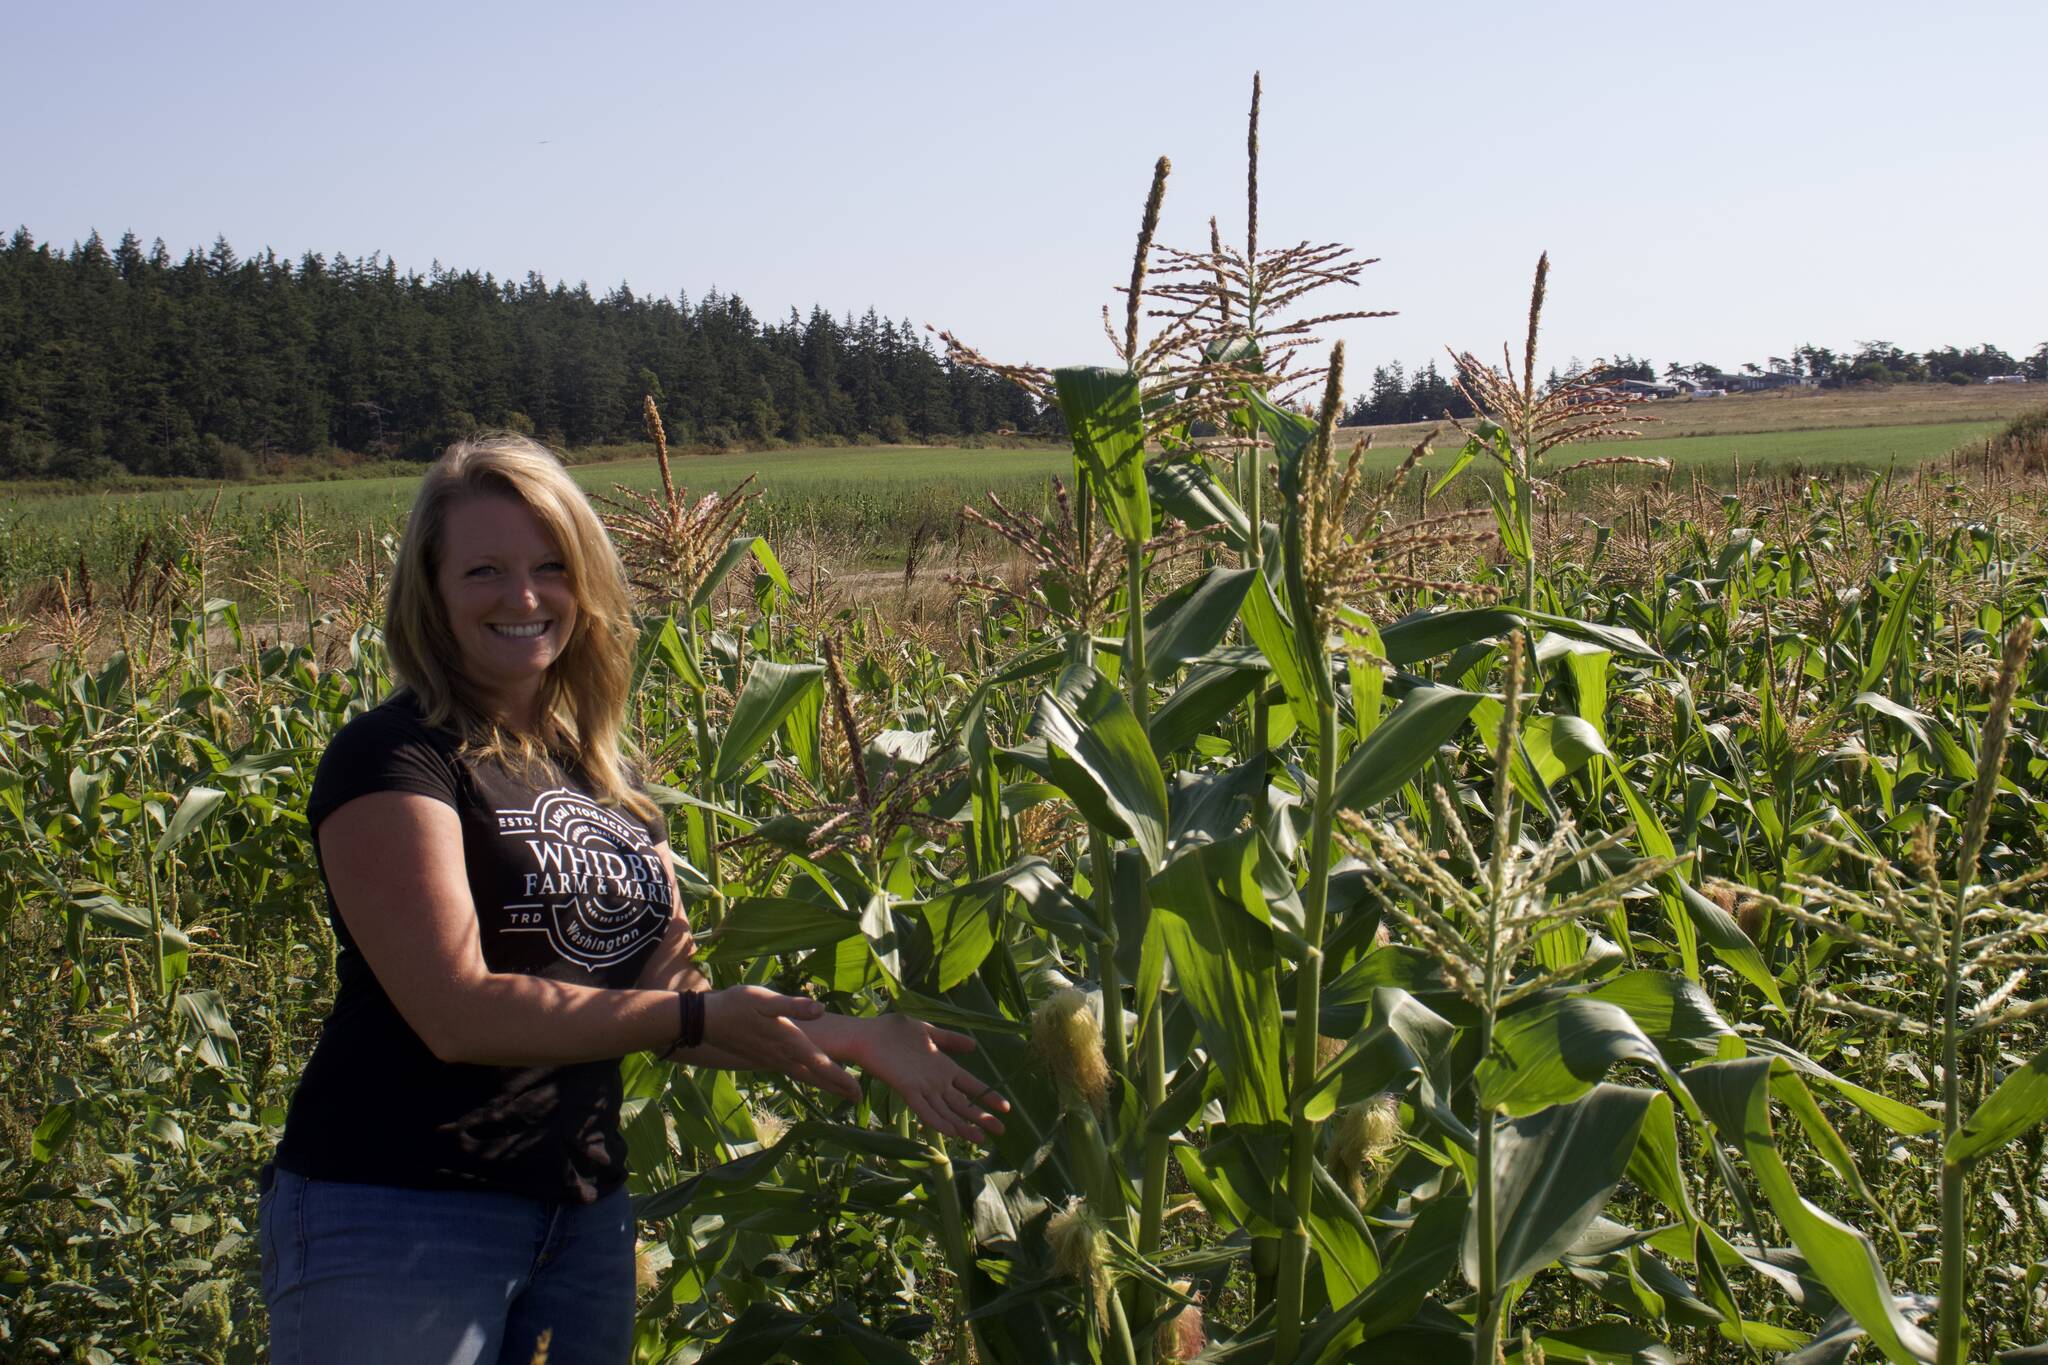 Photo by Rachel Rosen/Whidbey News-Times
Shannon Hamilton is the owner of Whidbey Farm and Market and is hosting CornFest this year as part of Eat Local Month.